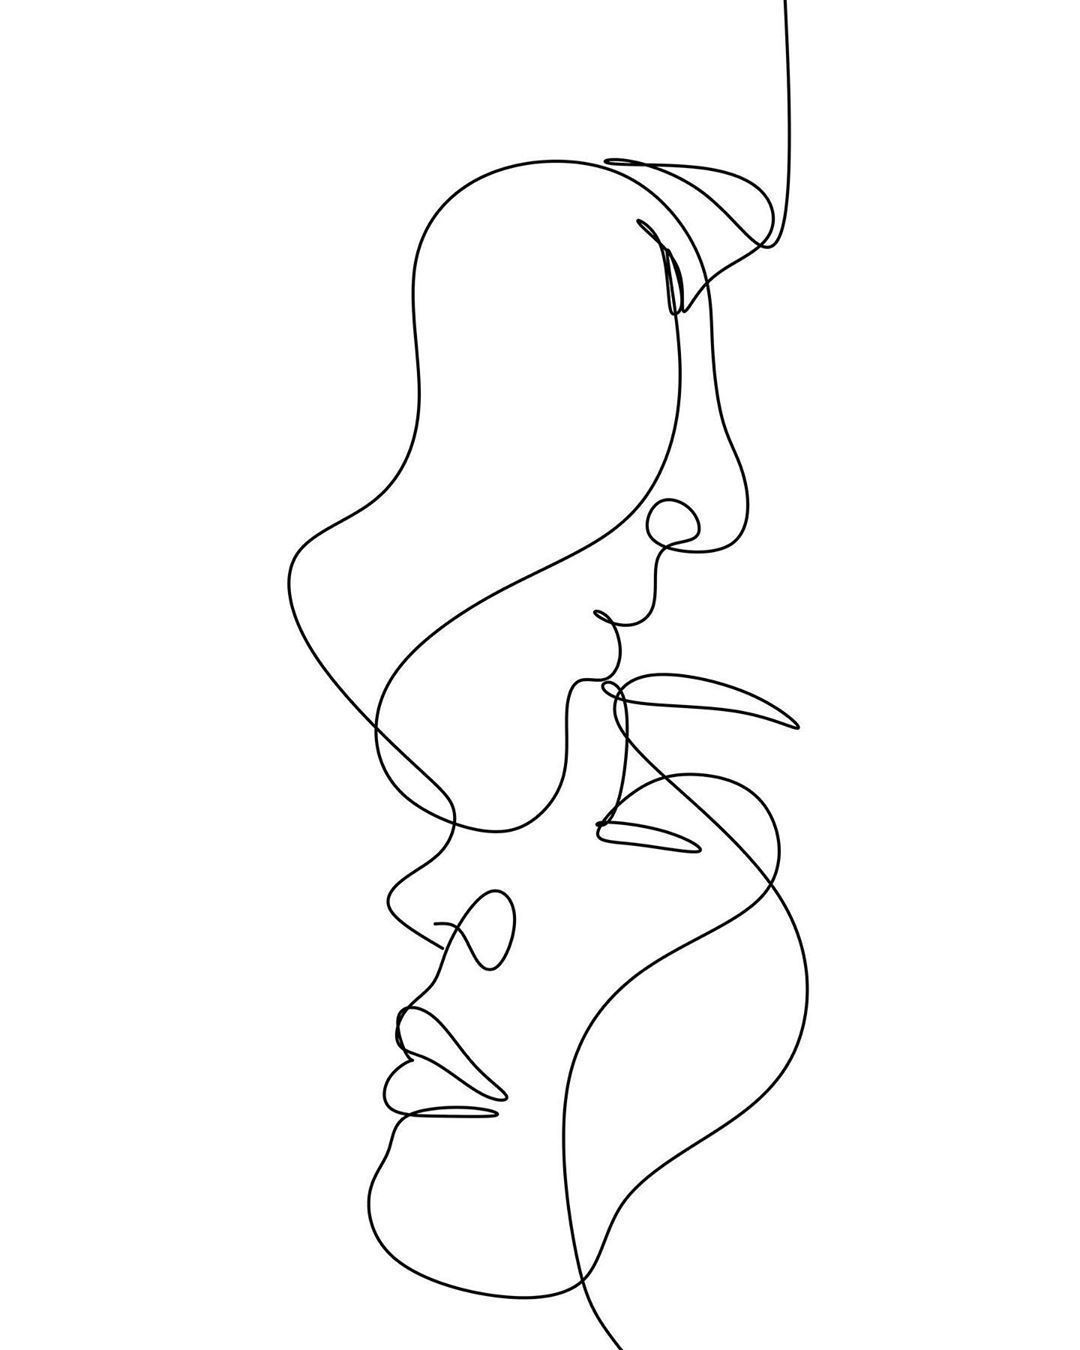 wallpaper. best wallpaper collection. iPhone wallpaper. background. Abstract face art, Abstract line art, Line art drawings